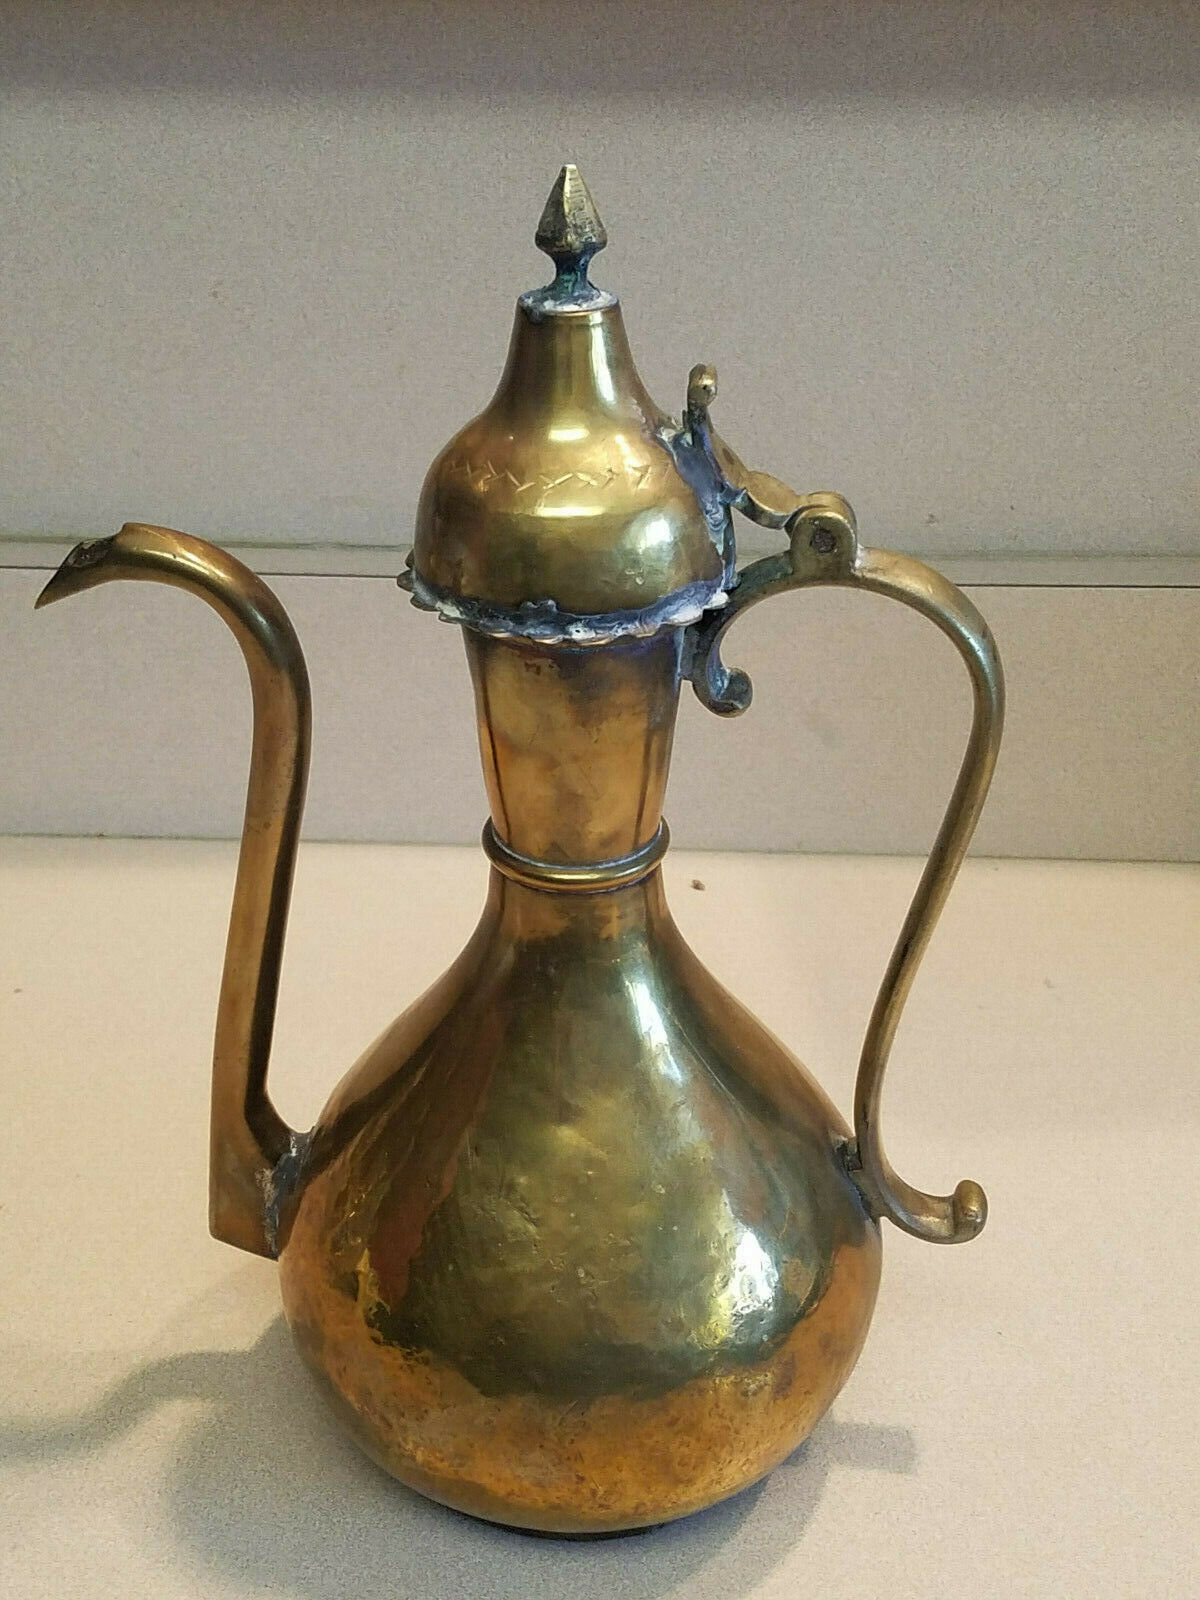 Brass Teapot Vintage from India - Brass Water Pitcher Engraved Floral  Design - Solid Brass Urn/Teapot Made in India